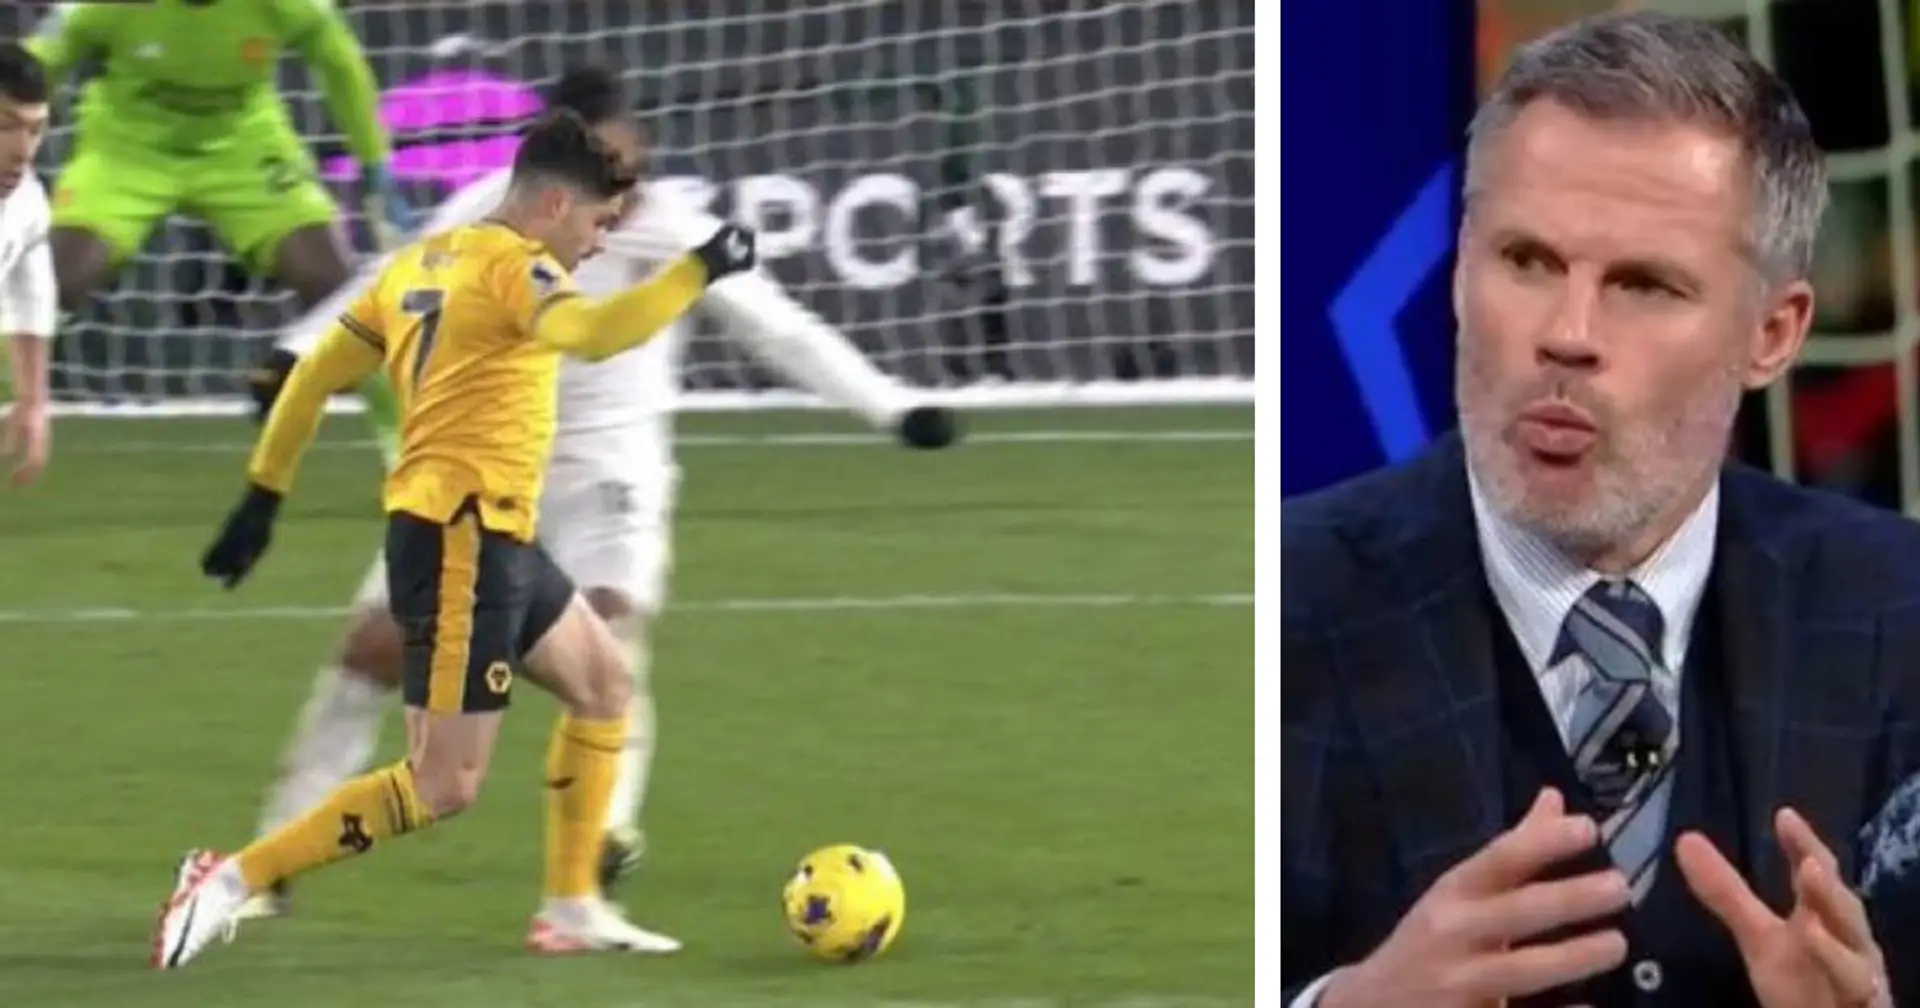 'That's not a penalty!': Jamie Carragher joins Man United fans in condemning referee call vs Wolves